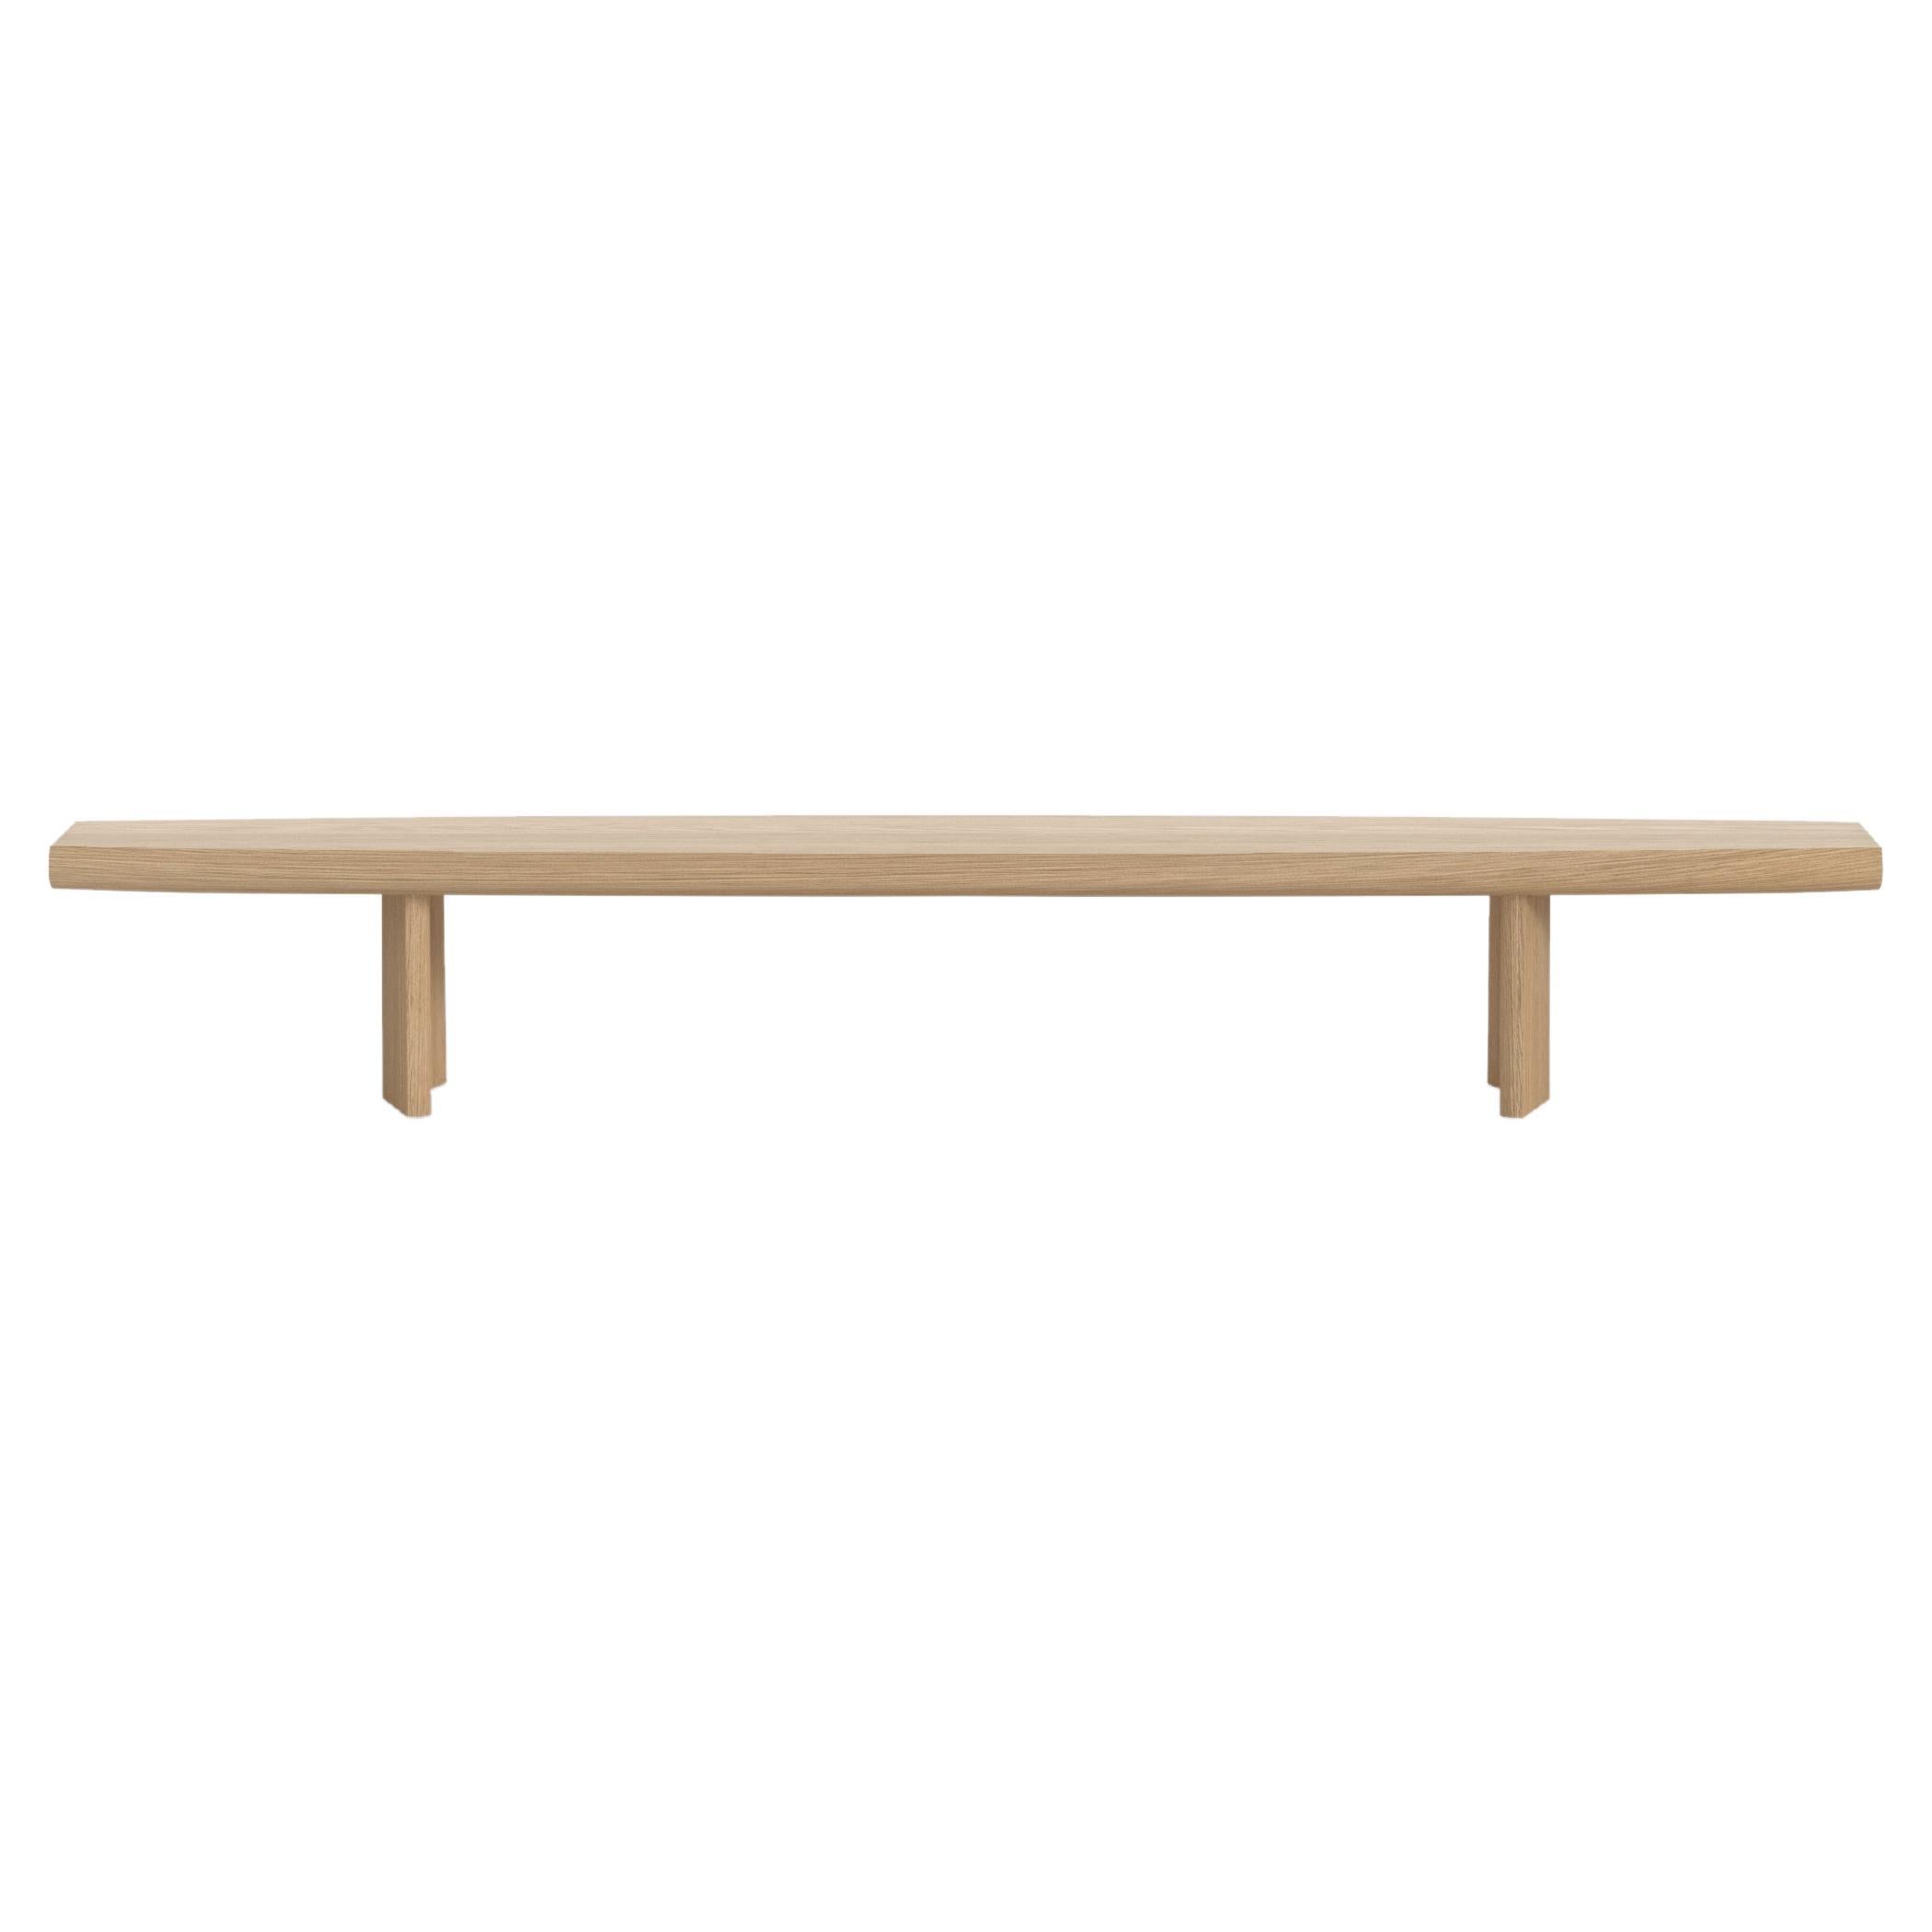 Peana Low Coffee Table, Bench in Natural Oak Wood Finish by Joel Escalona

Peana, which in English translates to base or pedestal, is a series of tables and different surfaces inspired by the idea of creating worthy furniture pieces to place and